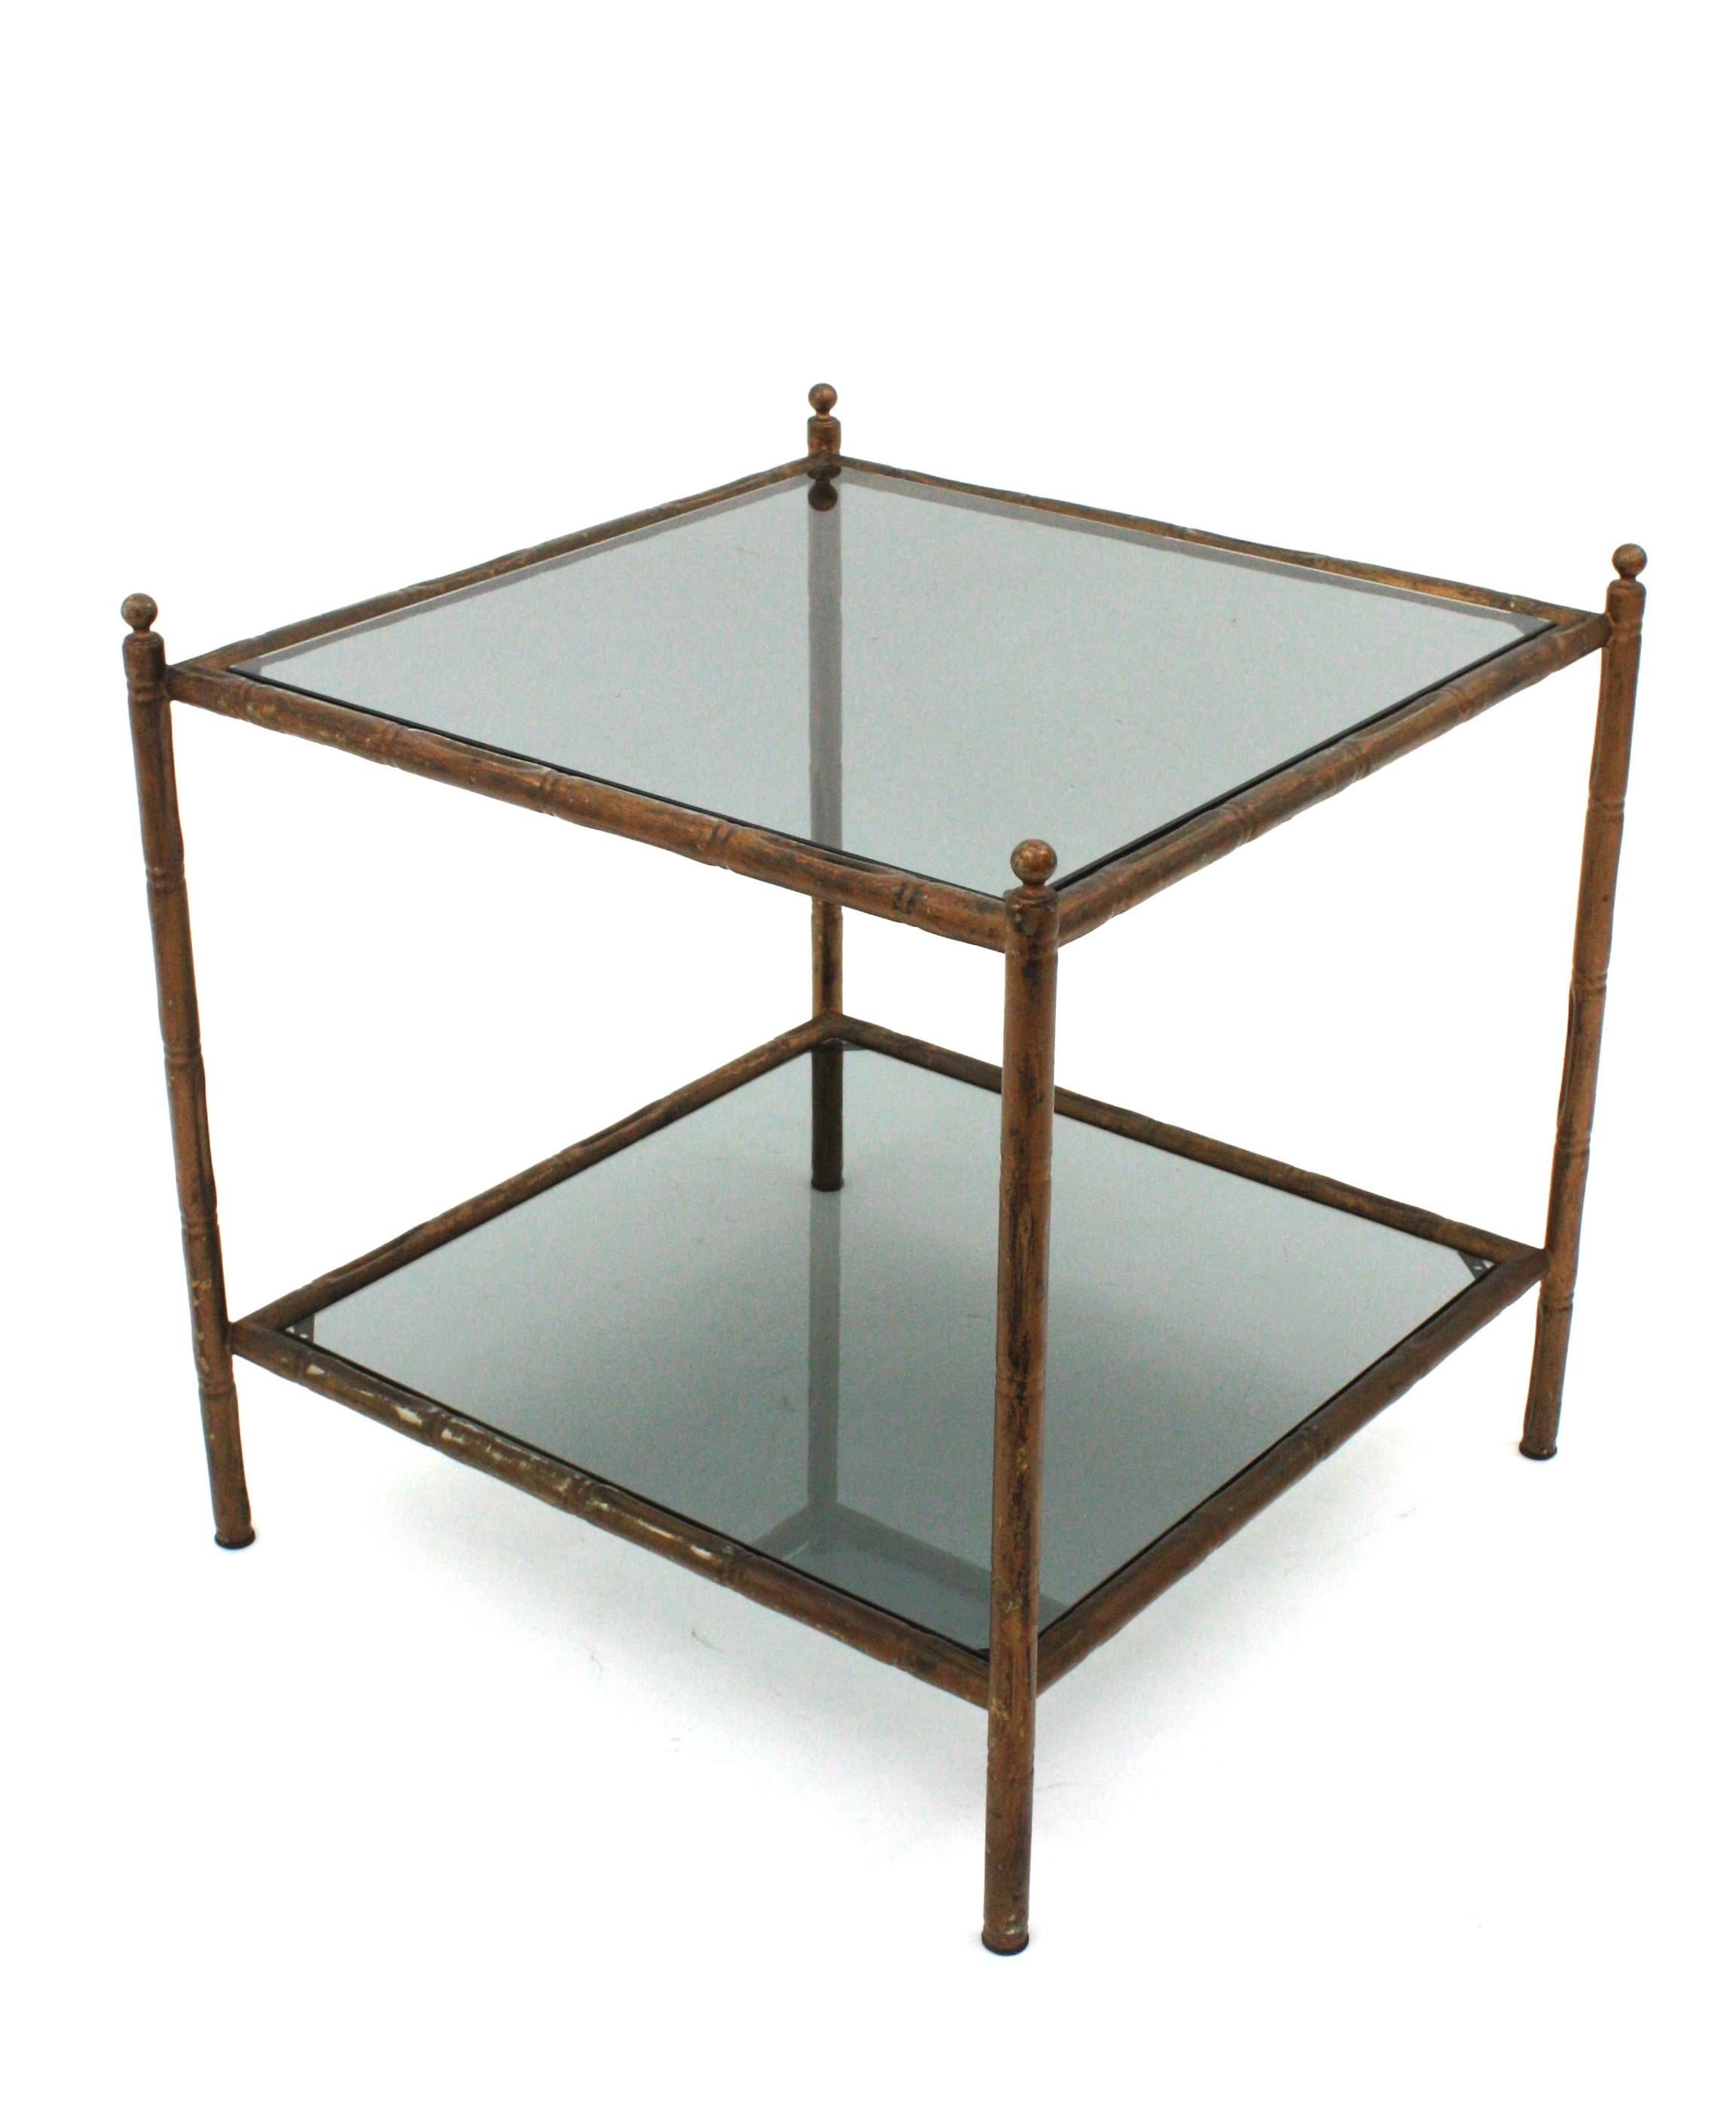 20th Century French Faux Bamboo Coffee Table, 1940s For Sale